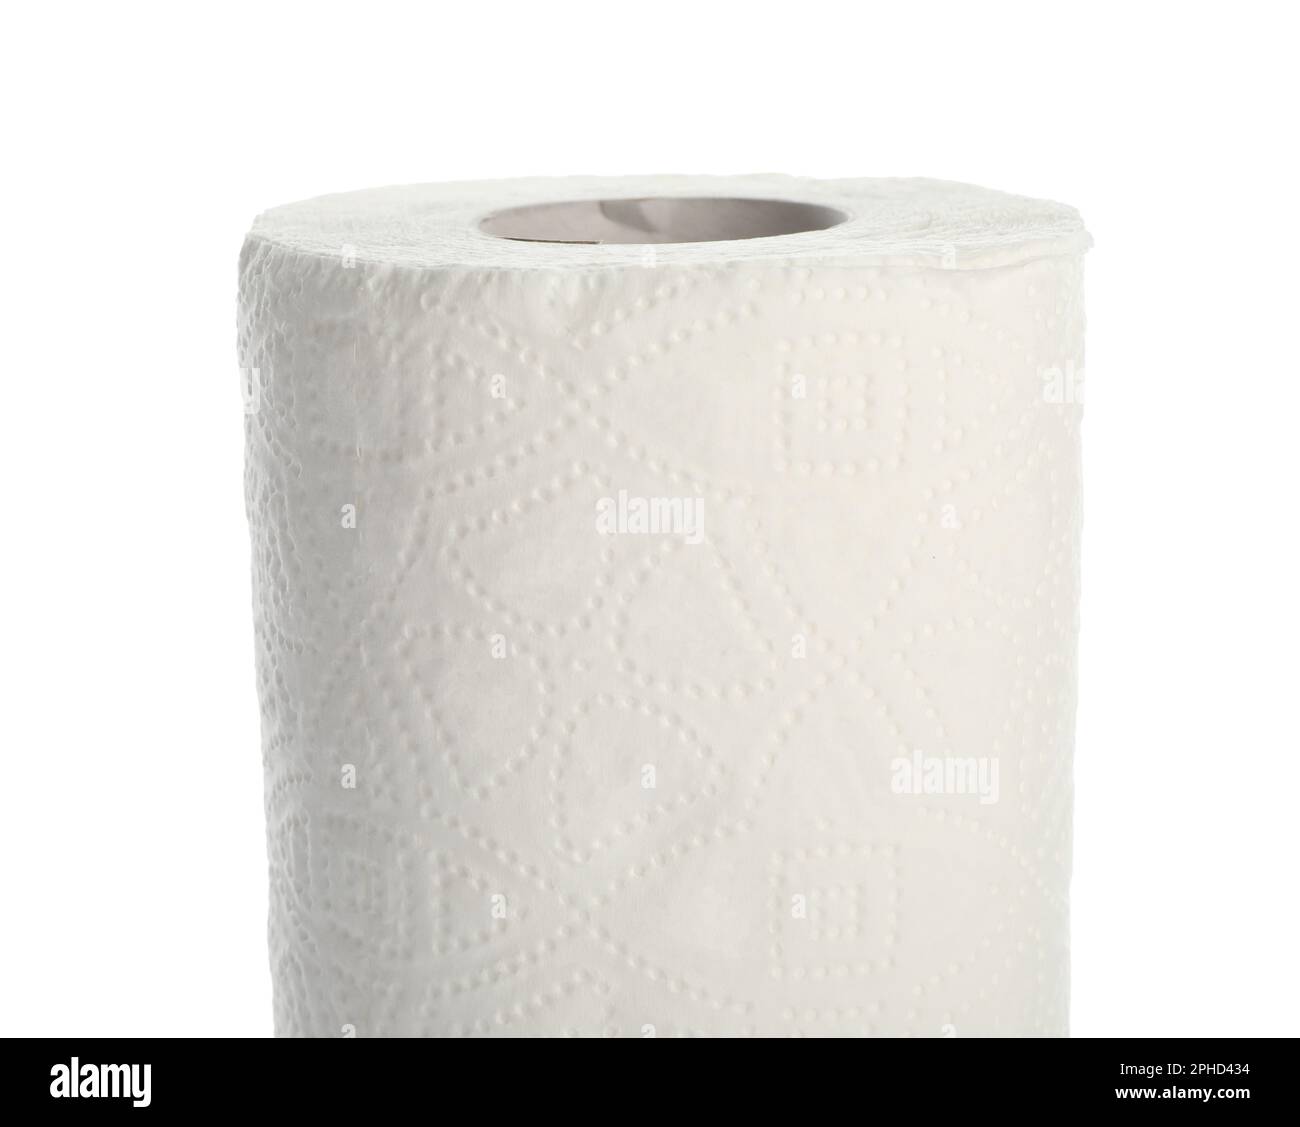 https://c8.alamy.com/comp/2PHD434/roll-of-paper-towels-isolated-on-white-2PHD434.jpg